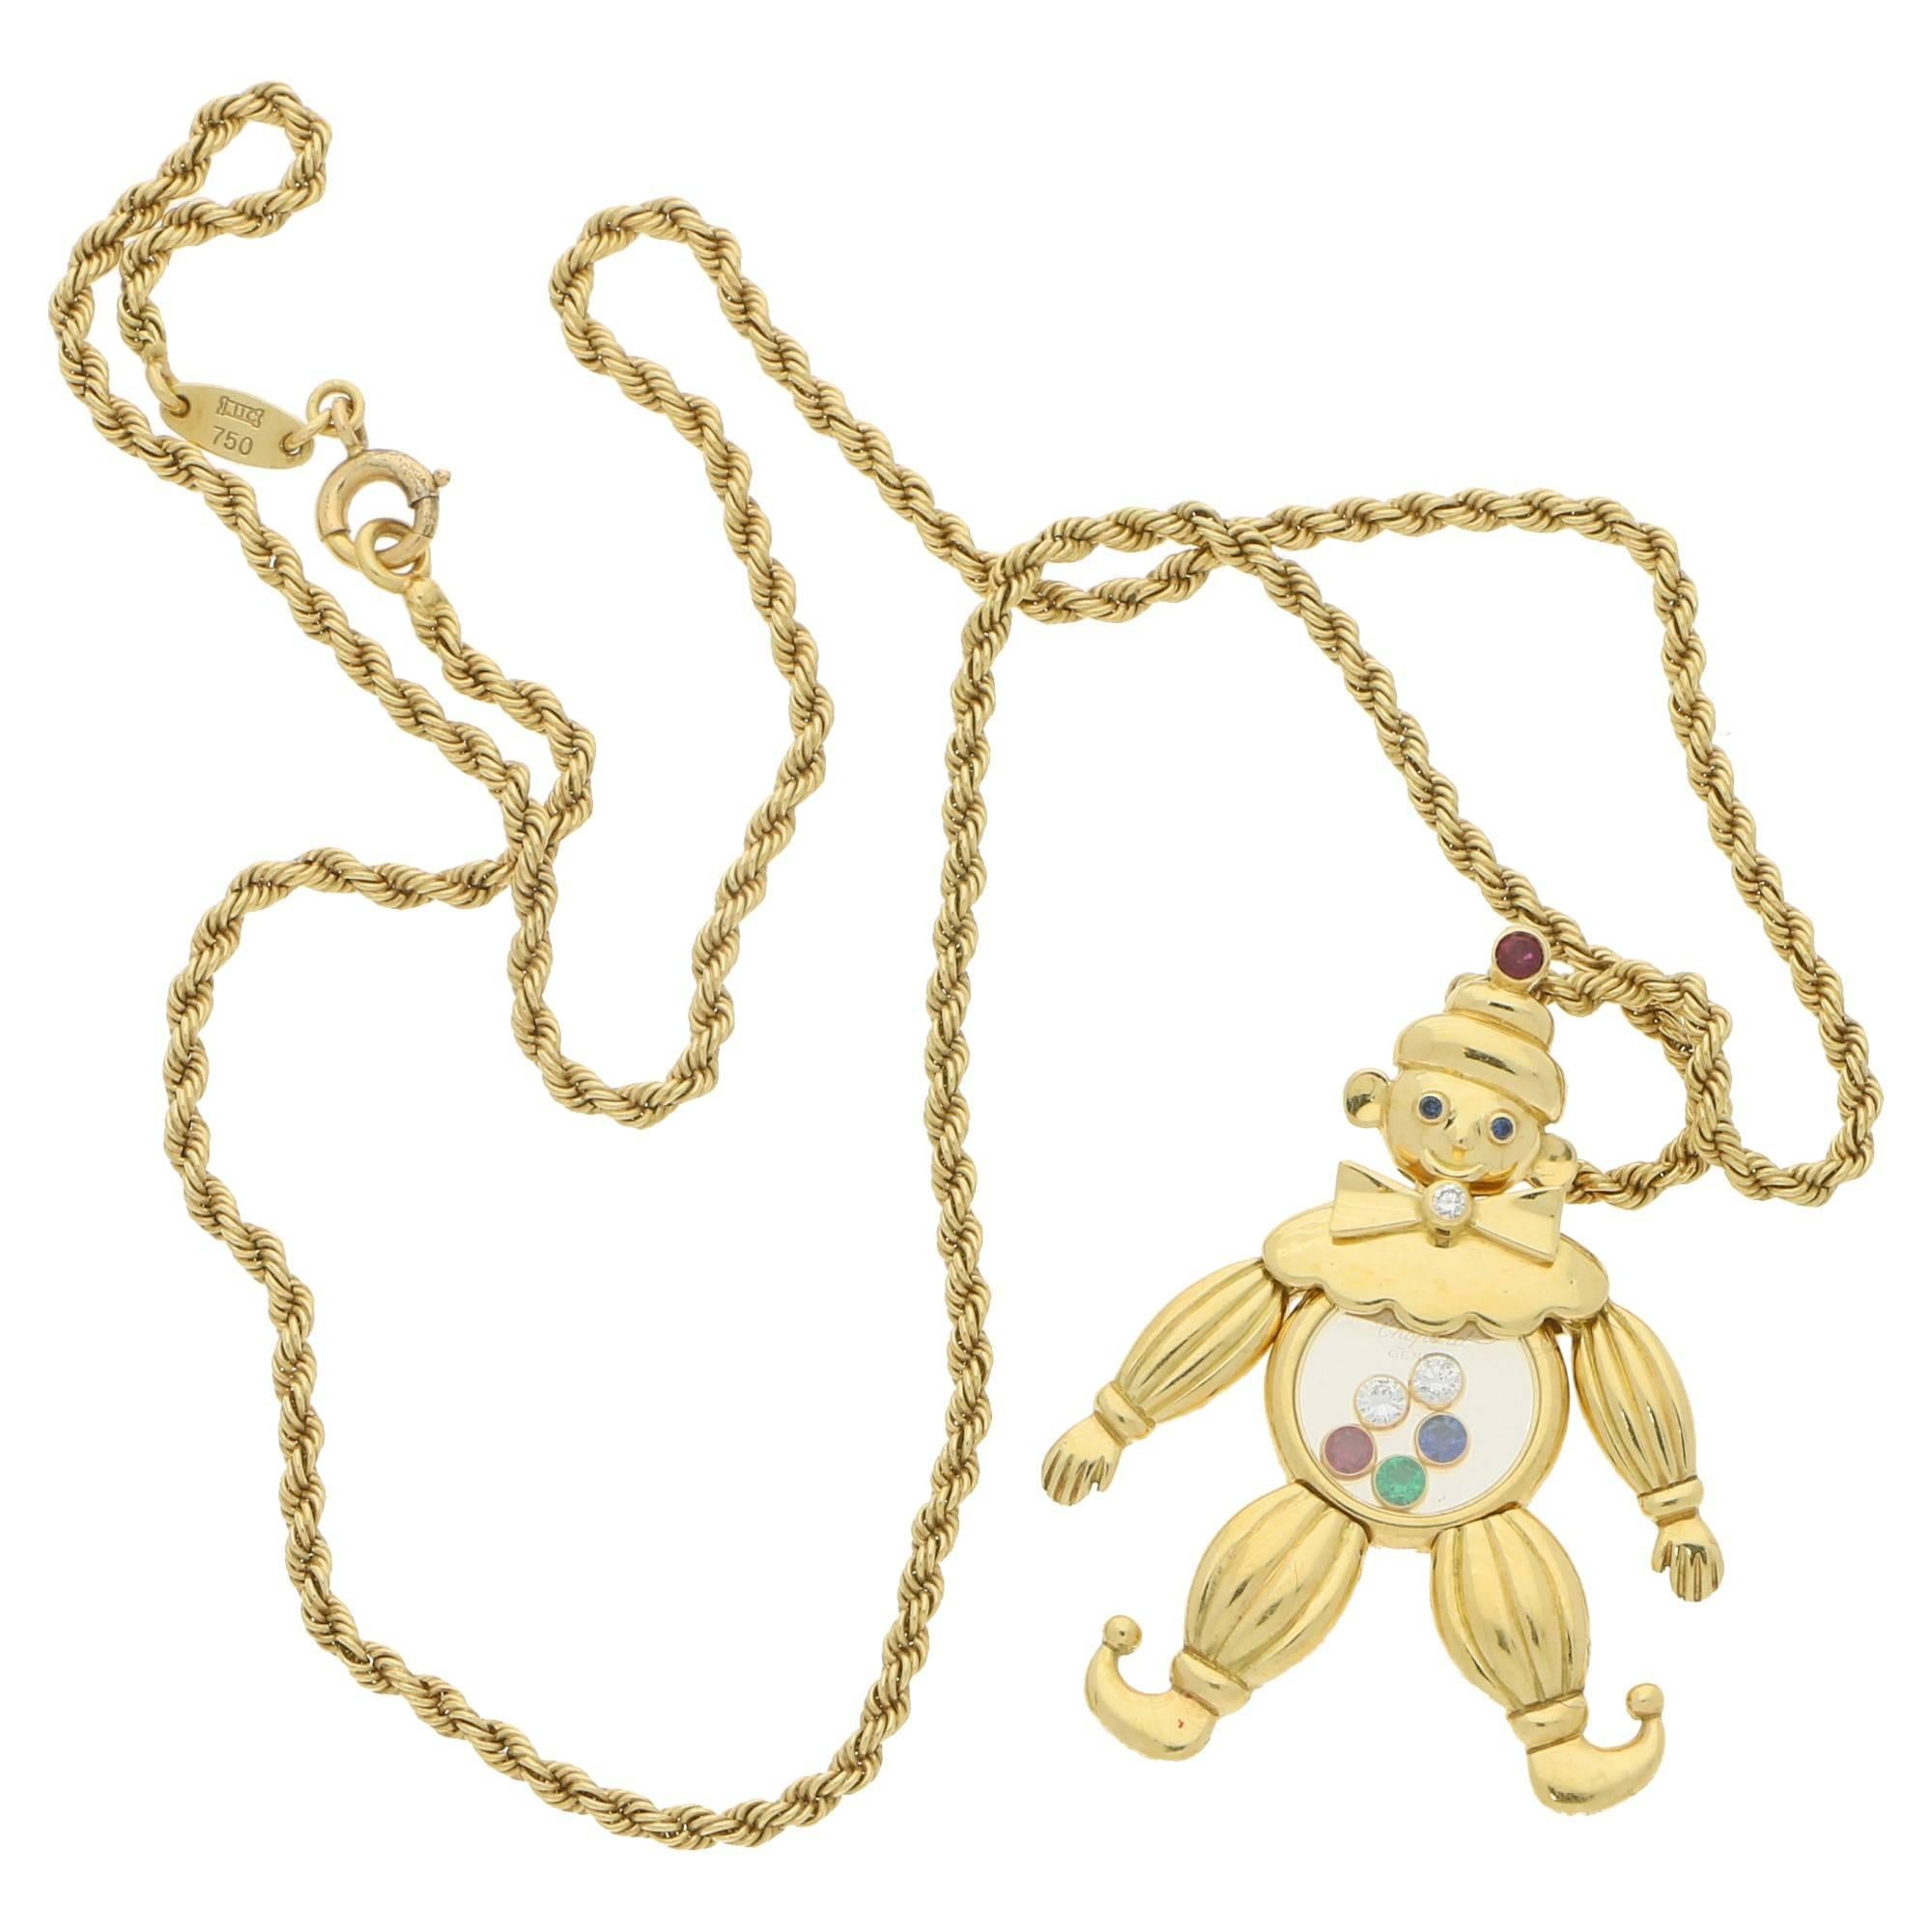 A whimsical articulated Chopard clown pendant set in 18ct yellow gold. With moving legs, arms, head and bow tie. The colourless sapphire crystal body encases two floating diamonds, a ruby, a sapphire and an emerald collet set in 18ct yellow gold.